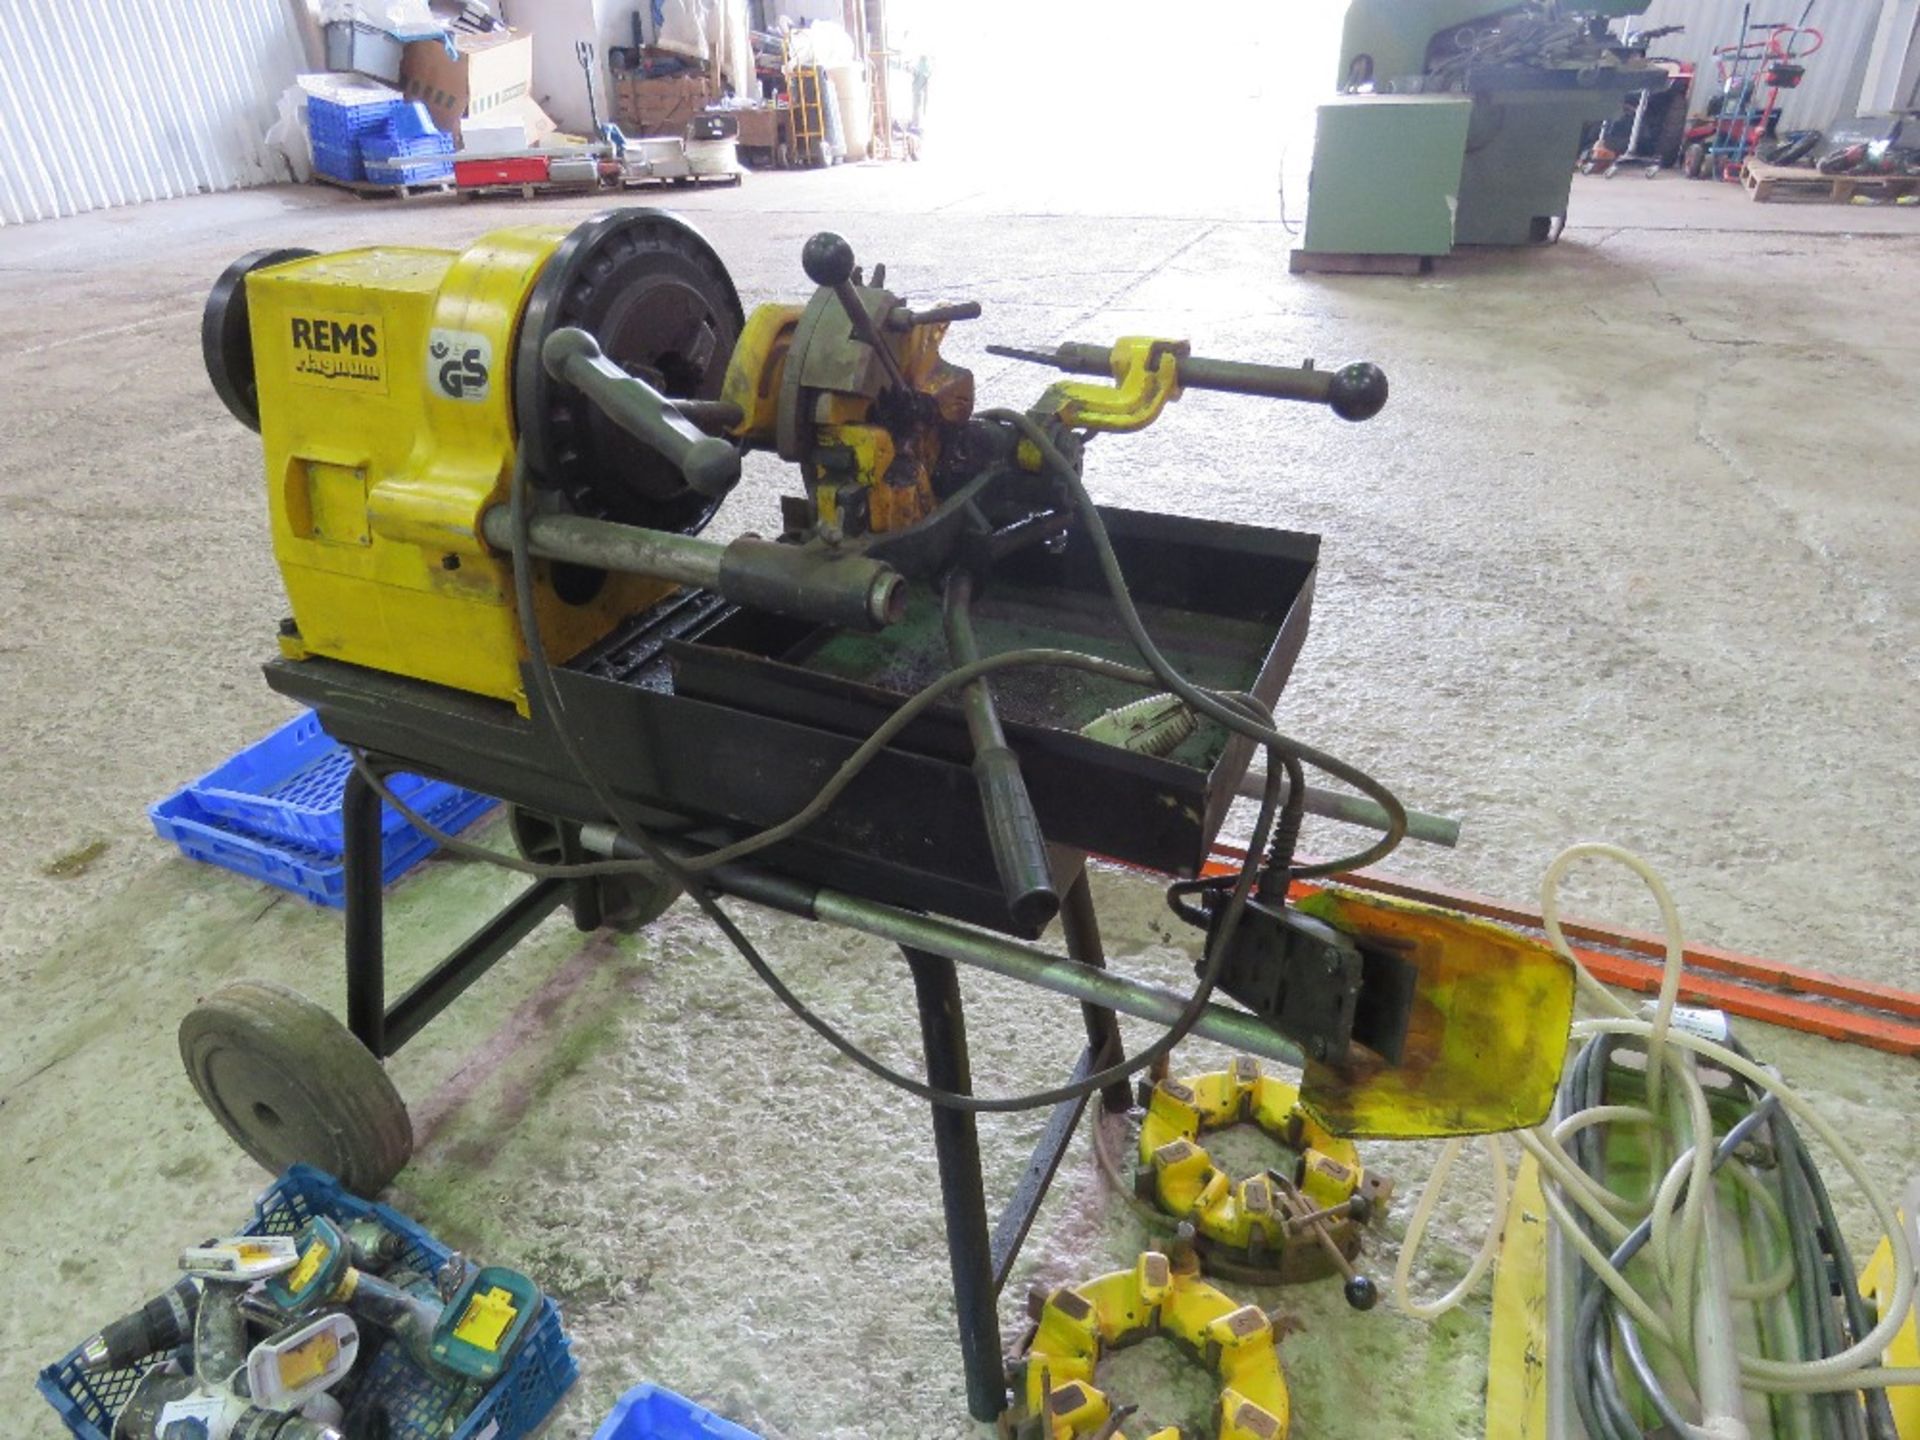 REMS 2000 PIPE THREADING STATION WITH 3 X HEADS. 110VOLT POWERED, SURPLUS TO REQUIREMENTS/LAZY ASSET - Image 5 of 5